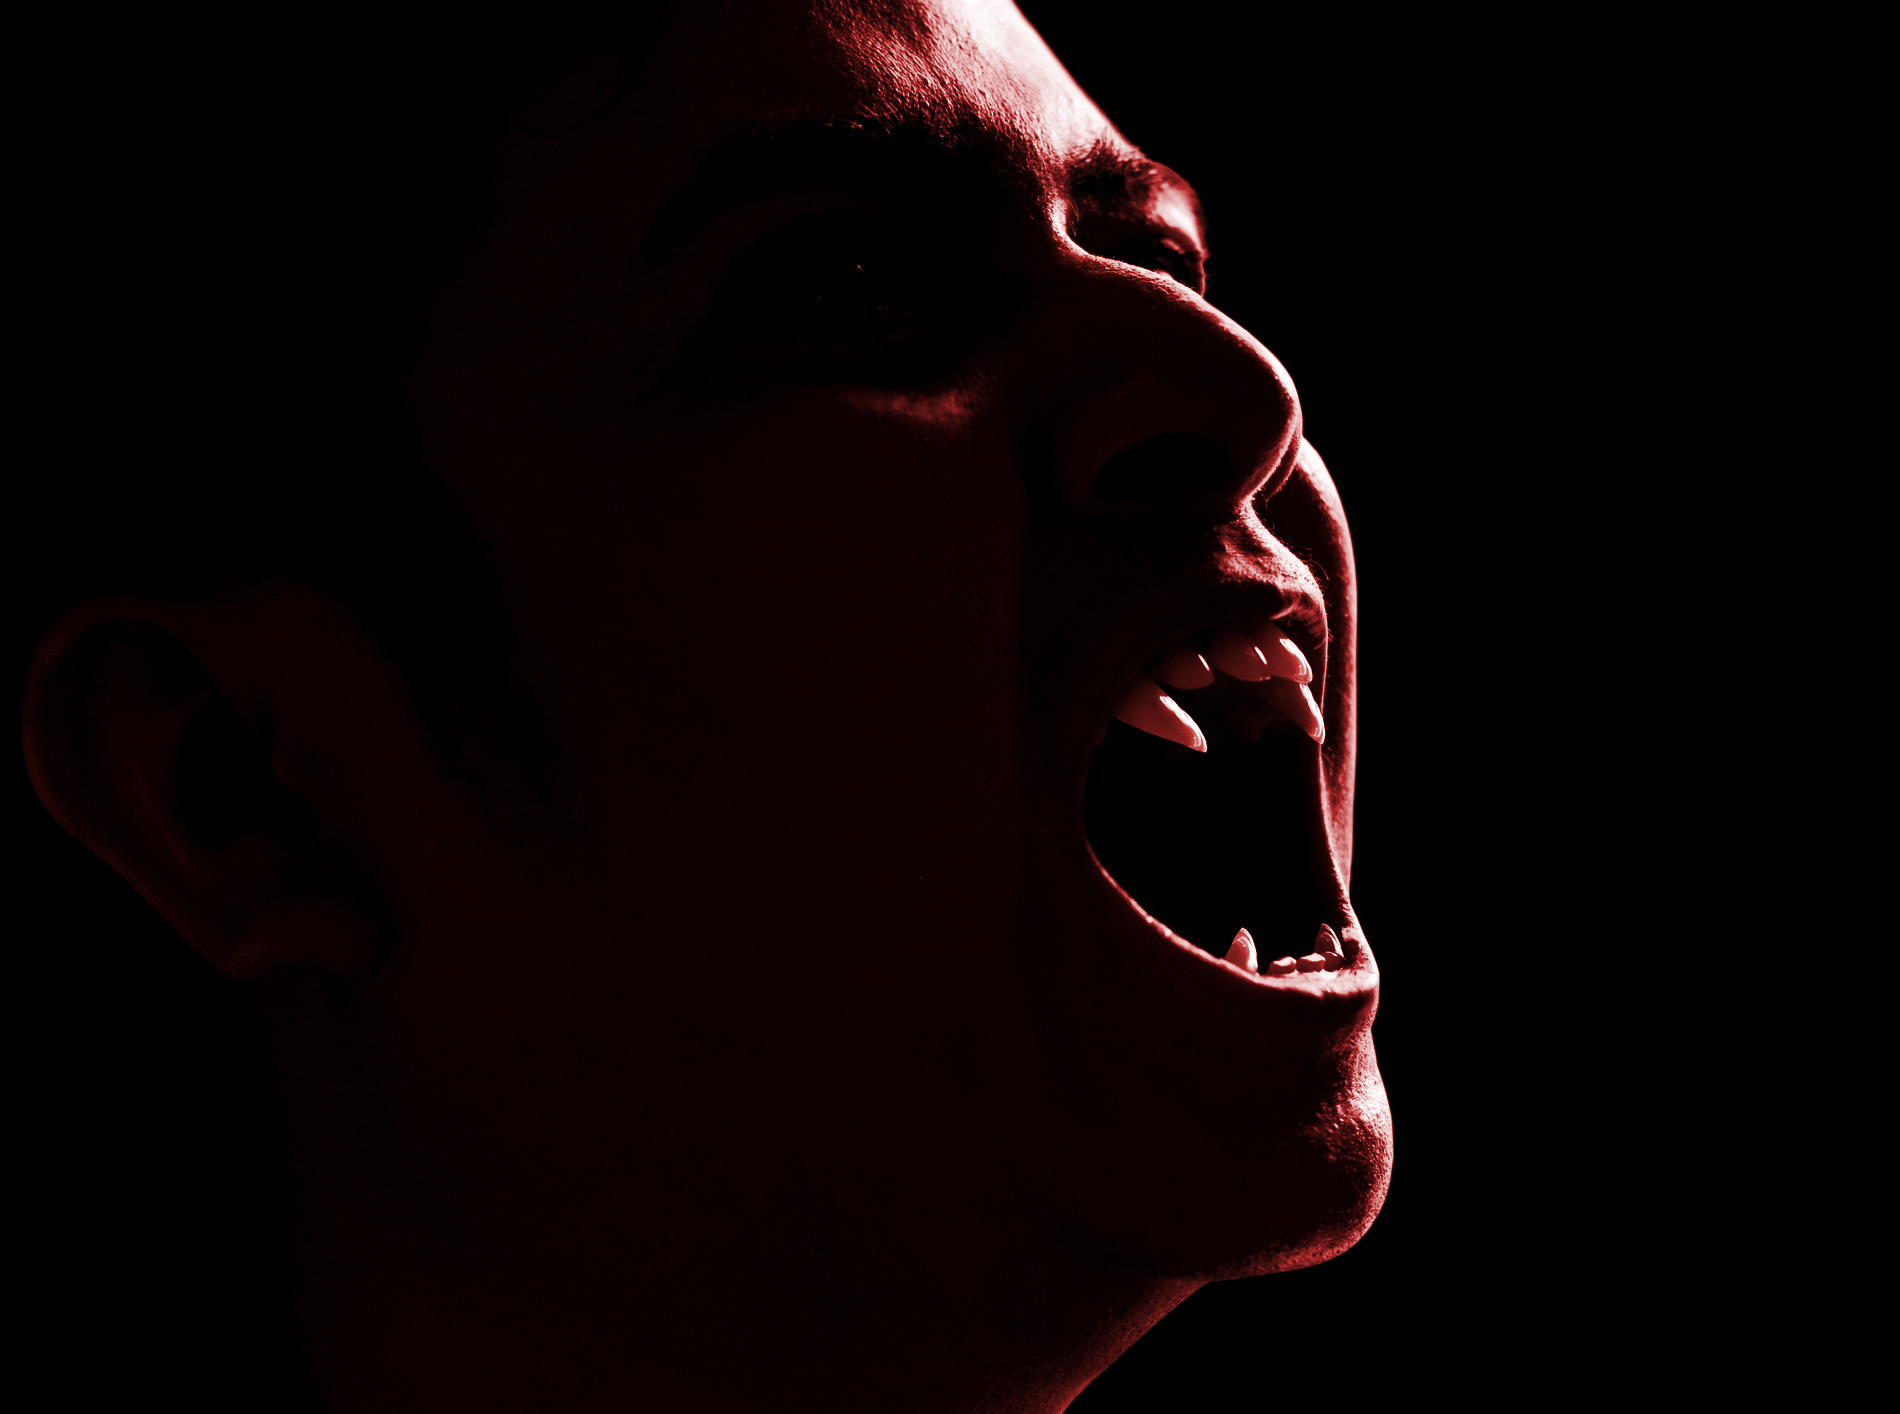 A shadowy vampire showing their fangs on a dark background